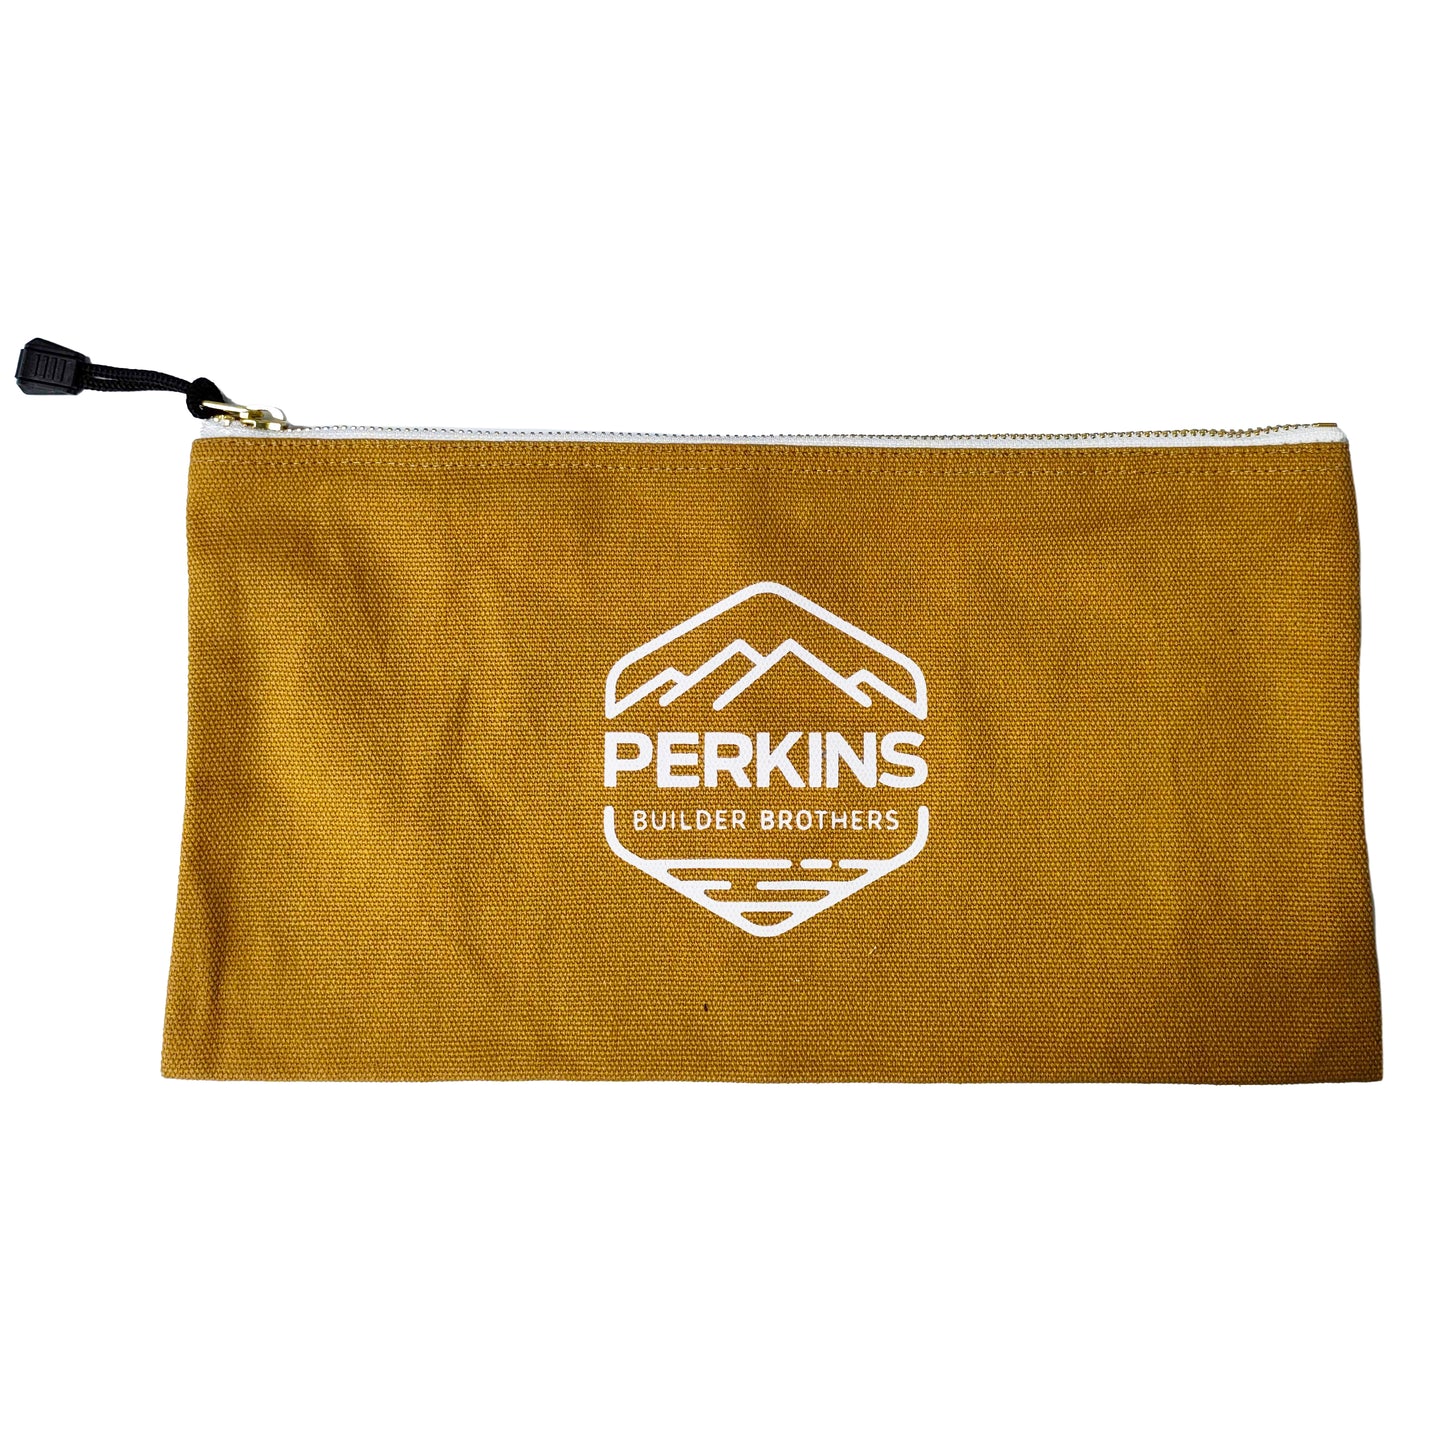 Perkins Builder Brothers Canvas Tool Pouch Zipper Bag, 3-Pack, Black/Brown/Grey